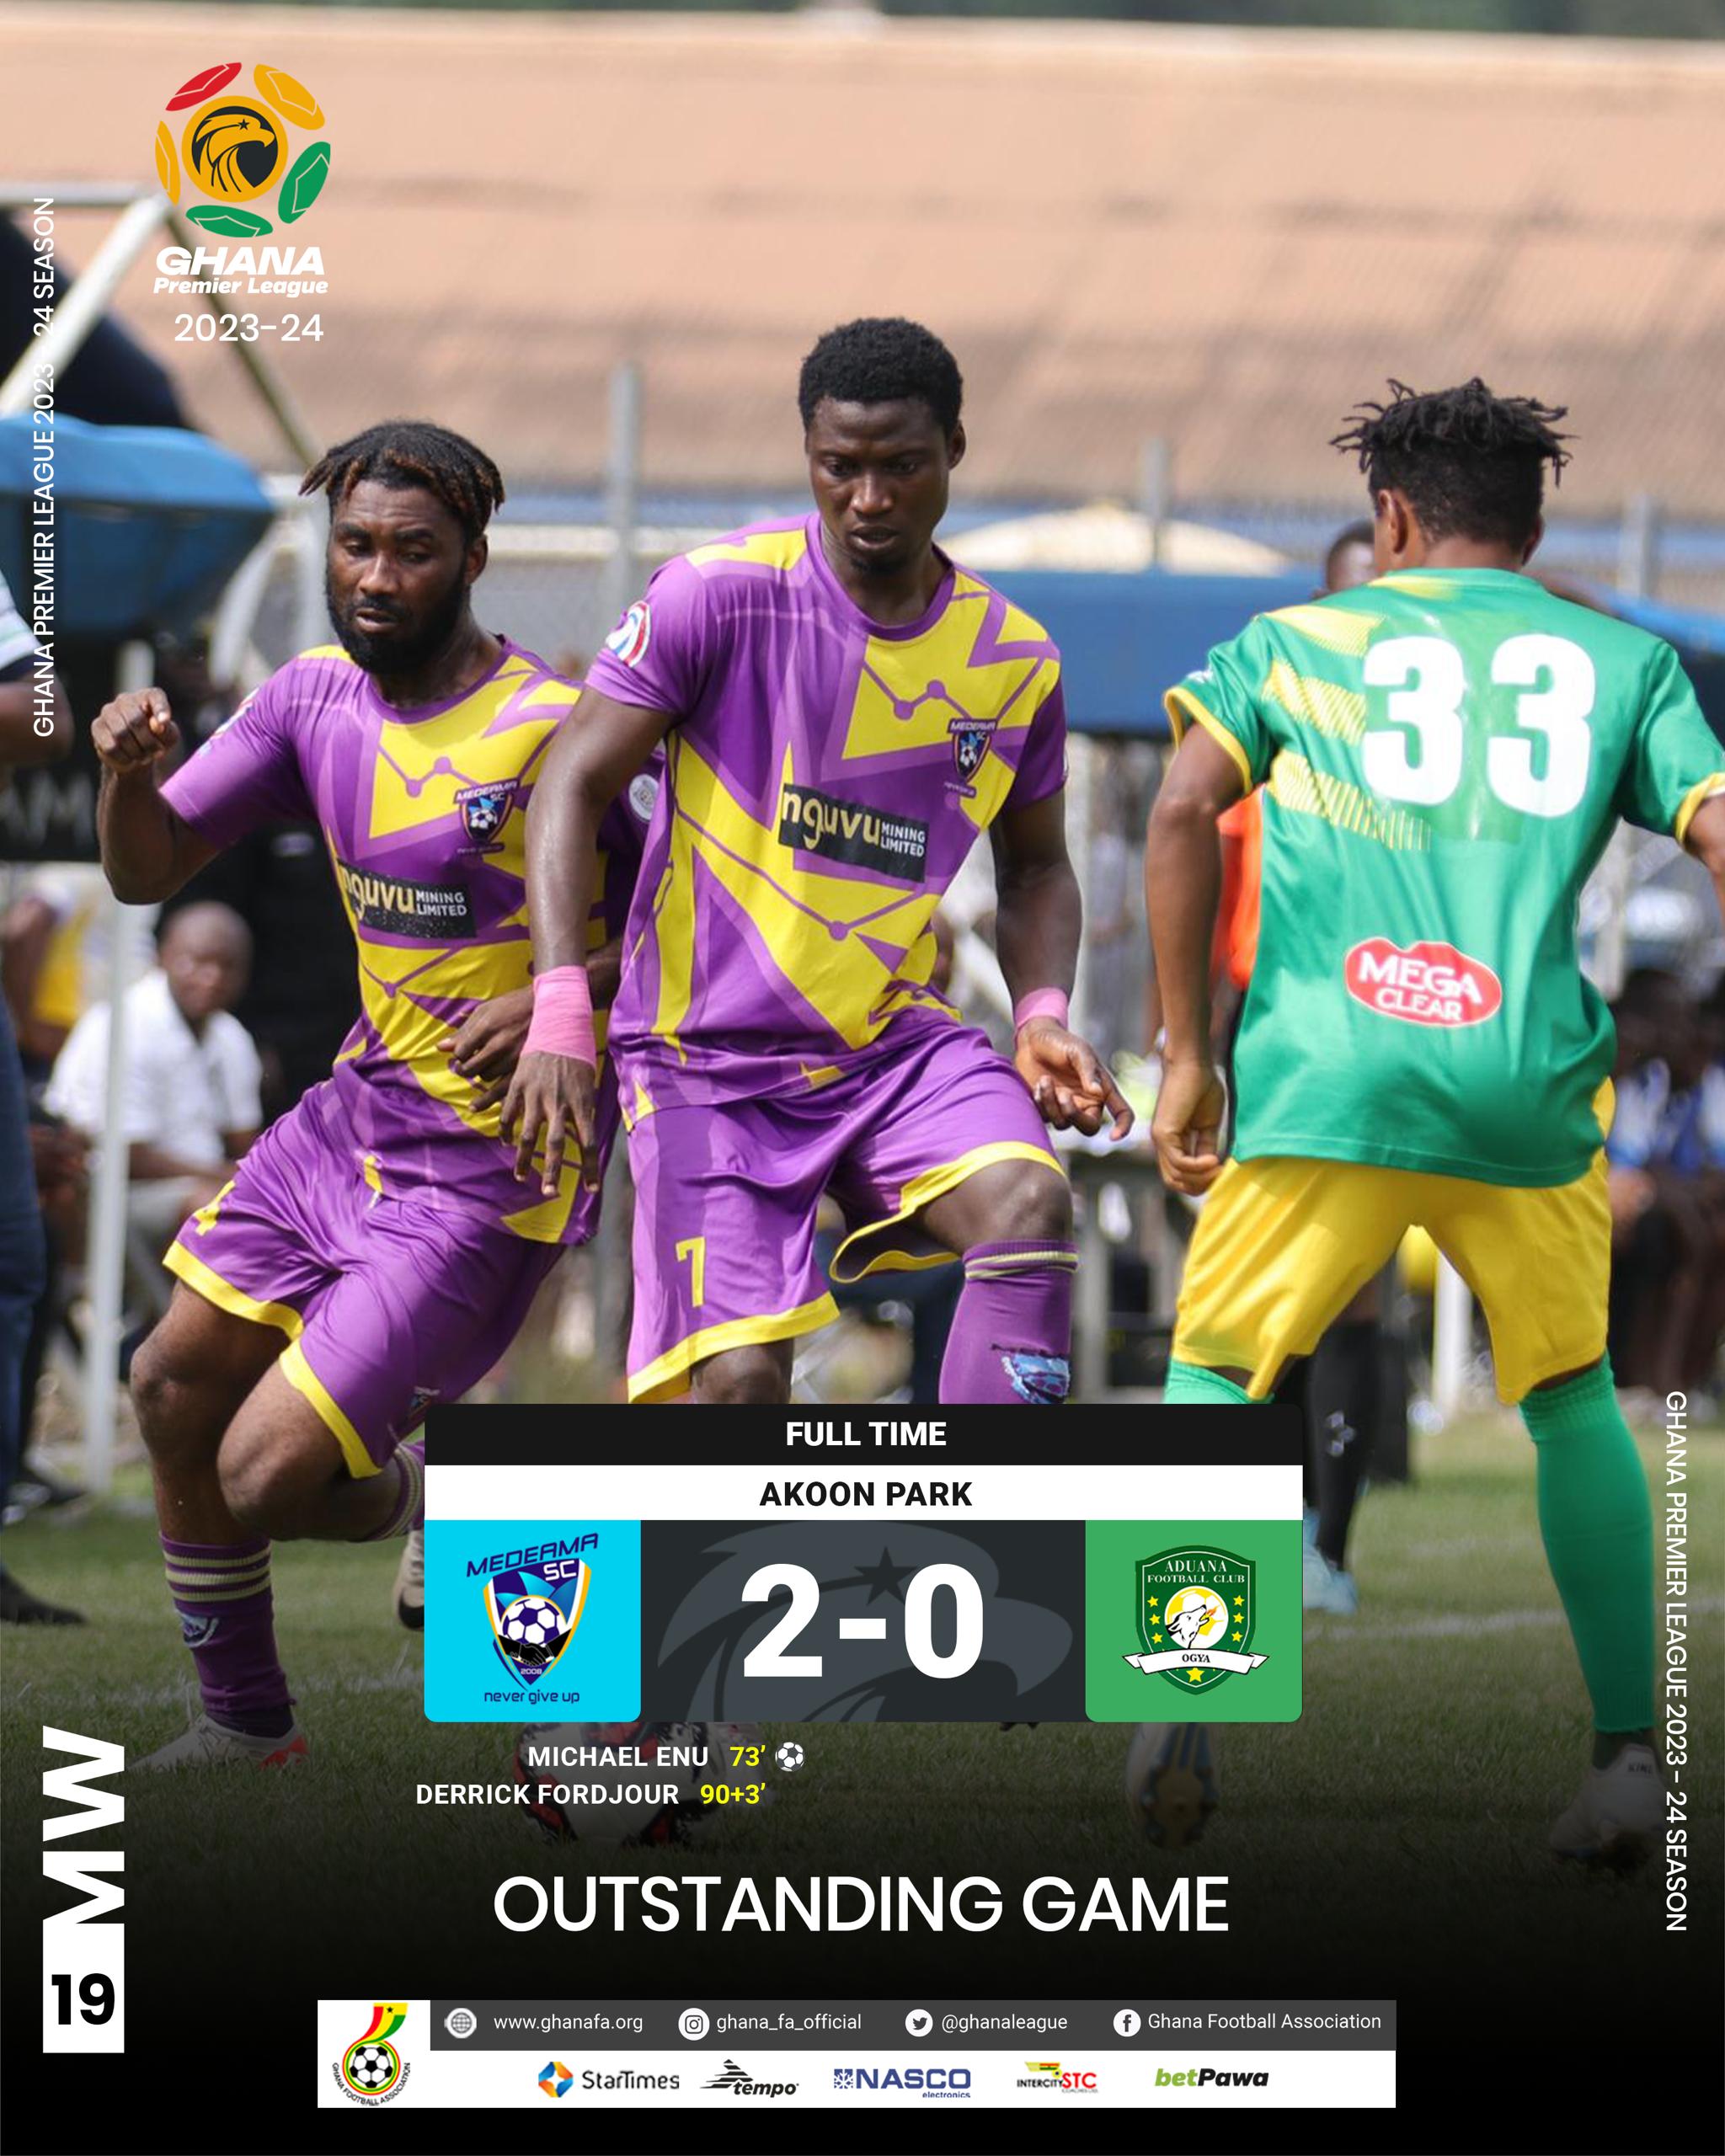 Two second half goals give Medeama SC win over Aduana FC in Premier League